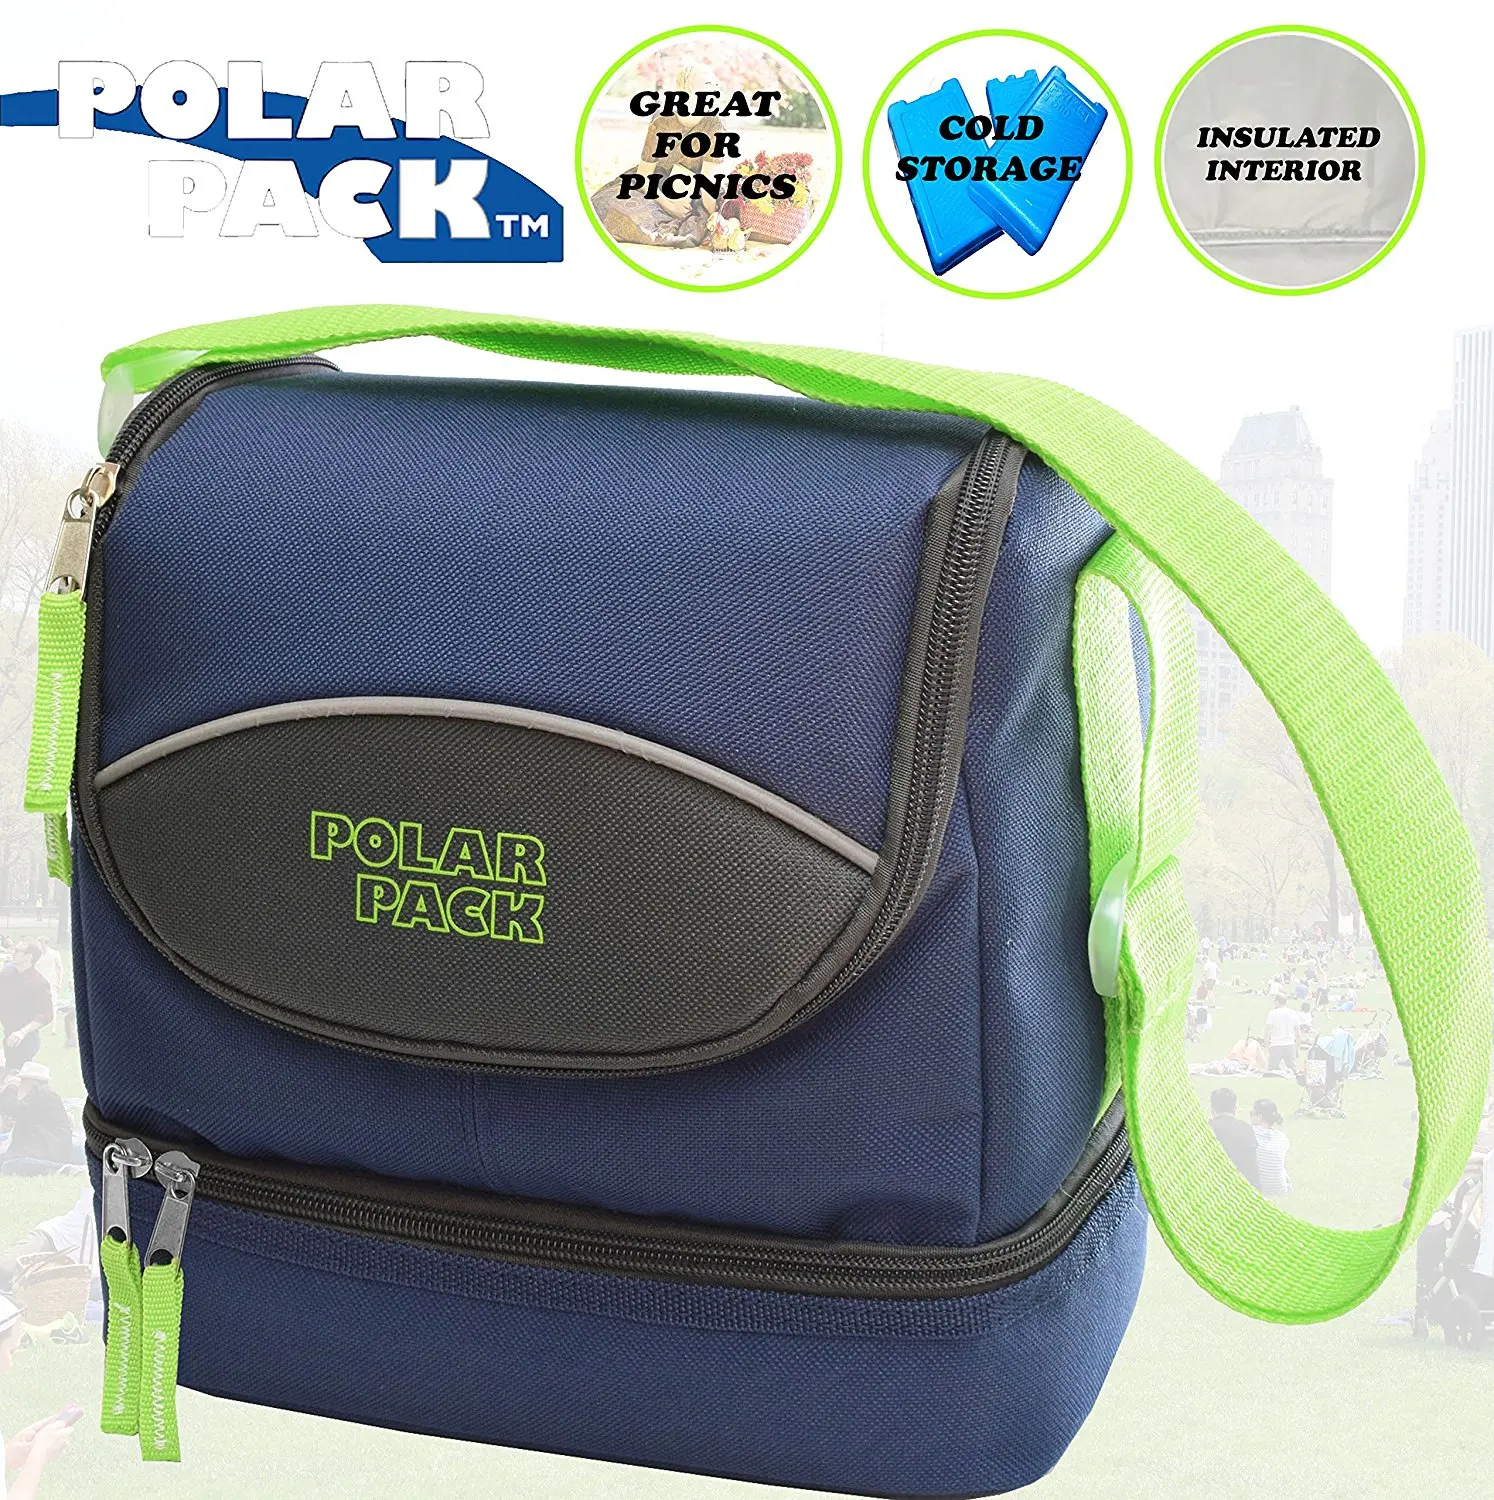 POLAR PACK Insulated Lunch Bag Insulated Tote Bag Cooler Bag Side Zipper Pocket Handle Carry Insulated Picnic Bag Indoor Outdoor Carry Bag Portable Travel Bag for Beach /& Work PURPLE//RASPBERRY//LIME